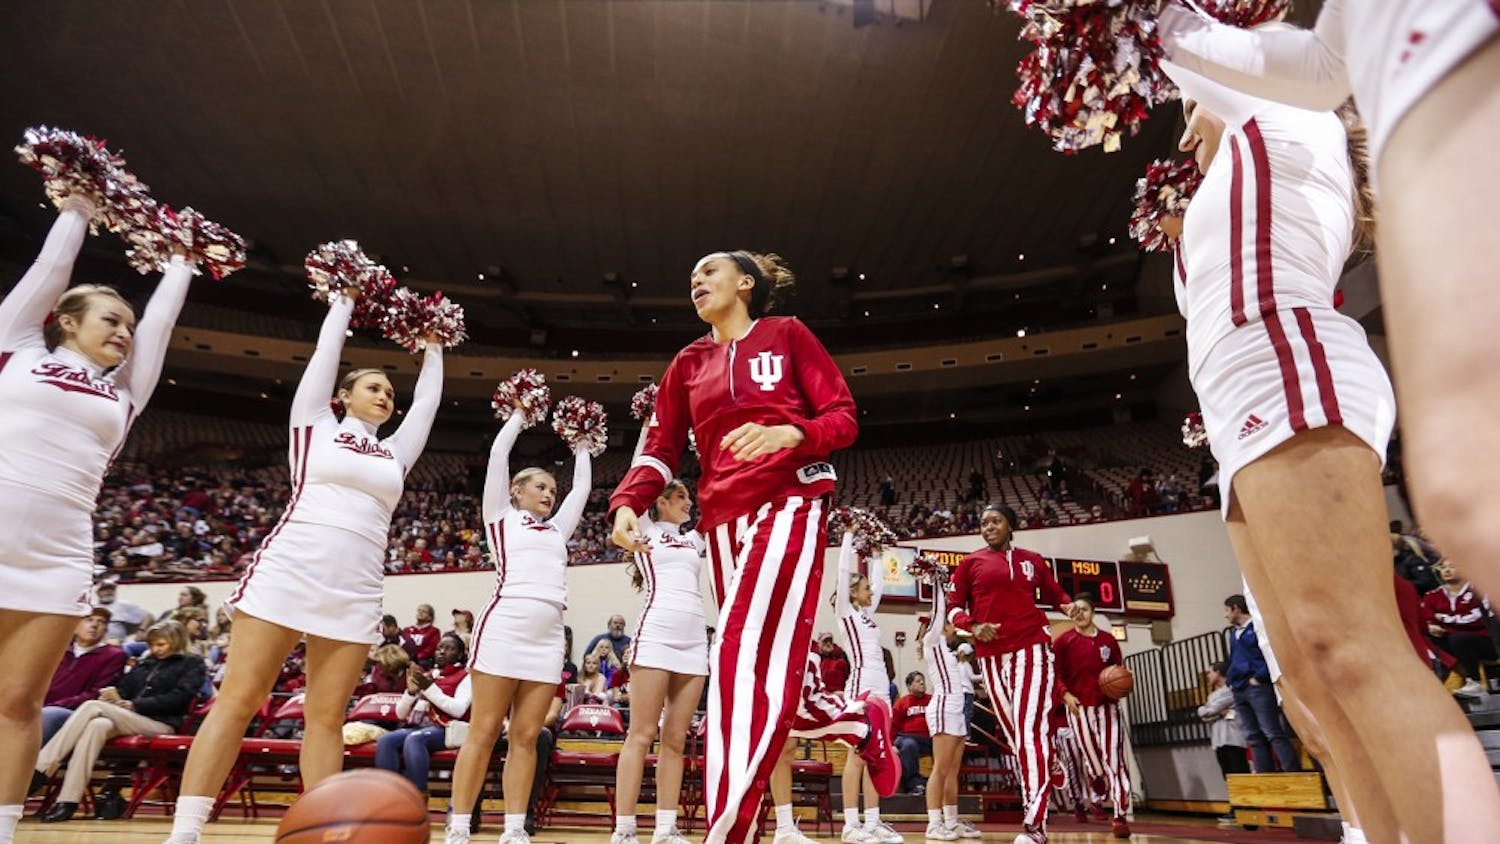 IU runs onto the court at the beginning of the Hoosiers' game against the Michigan State Spartans on Dec. 28 at Simon Skjodt Assembly Hall. IU plays Northwestern on Sunday afternoon.